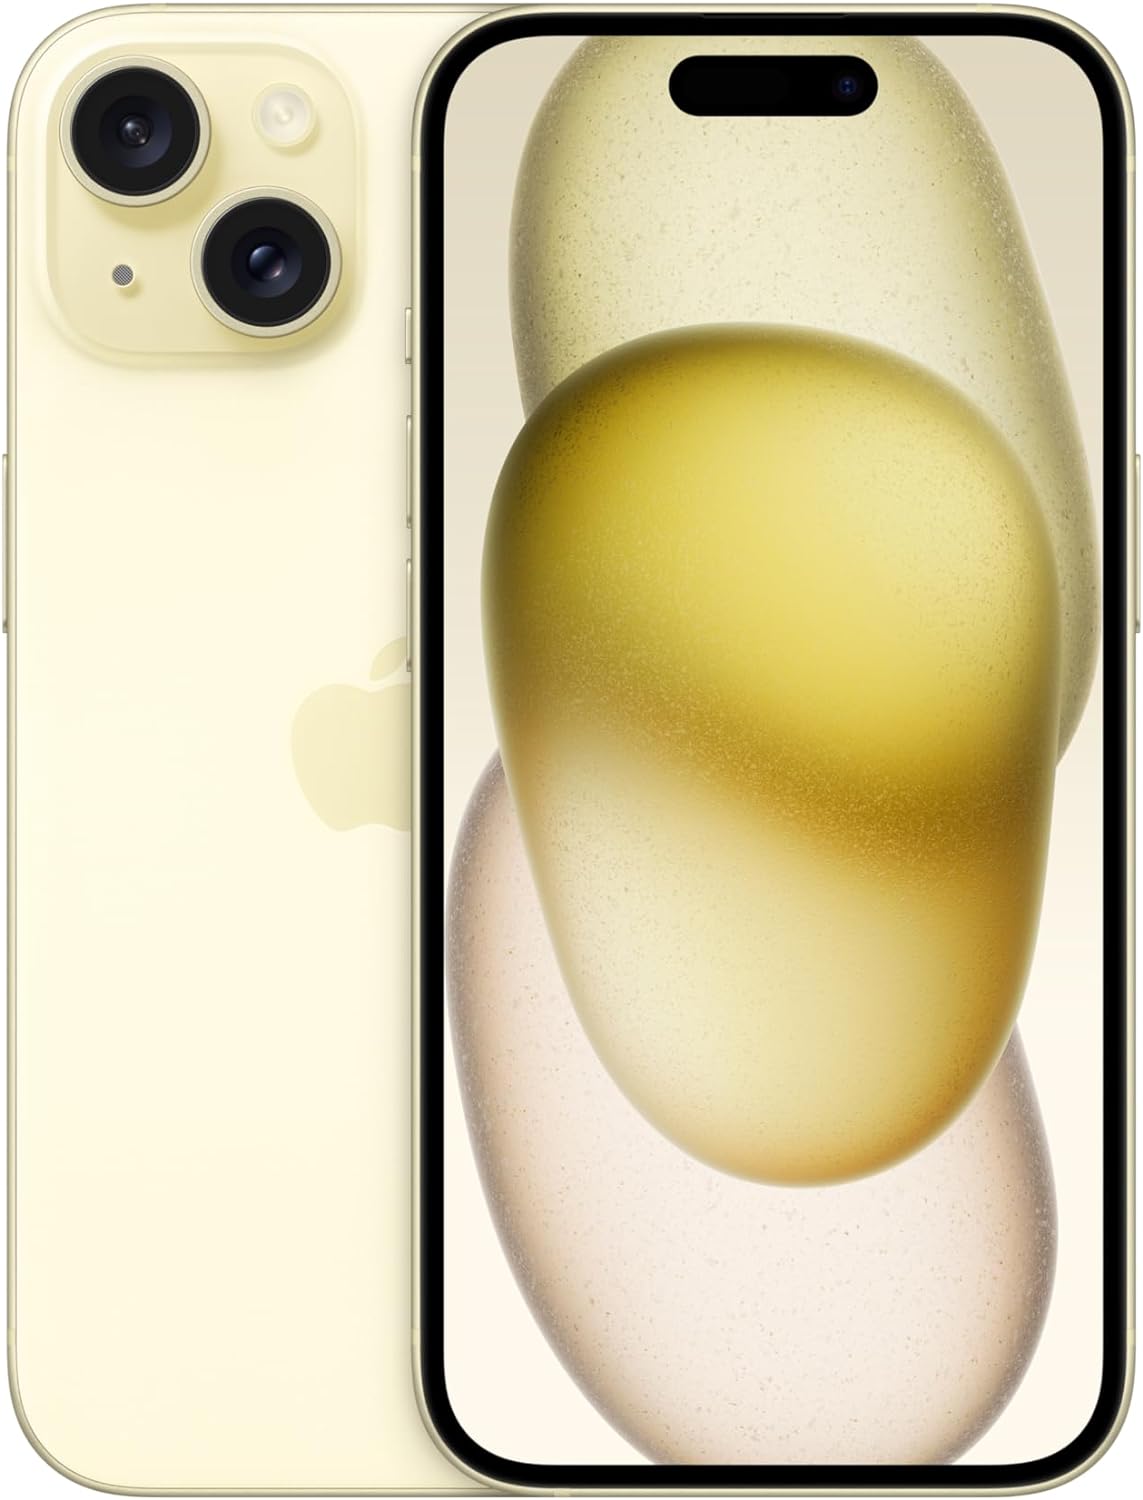 Apple iPhone 15 (256 GB) - Yellow: Dynamic Island alerts and Live Activities for seamless multitasking. 0195949037160